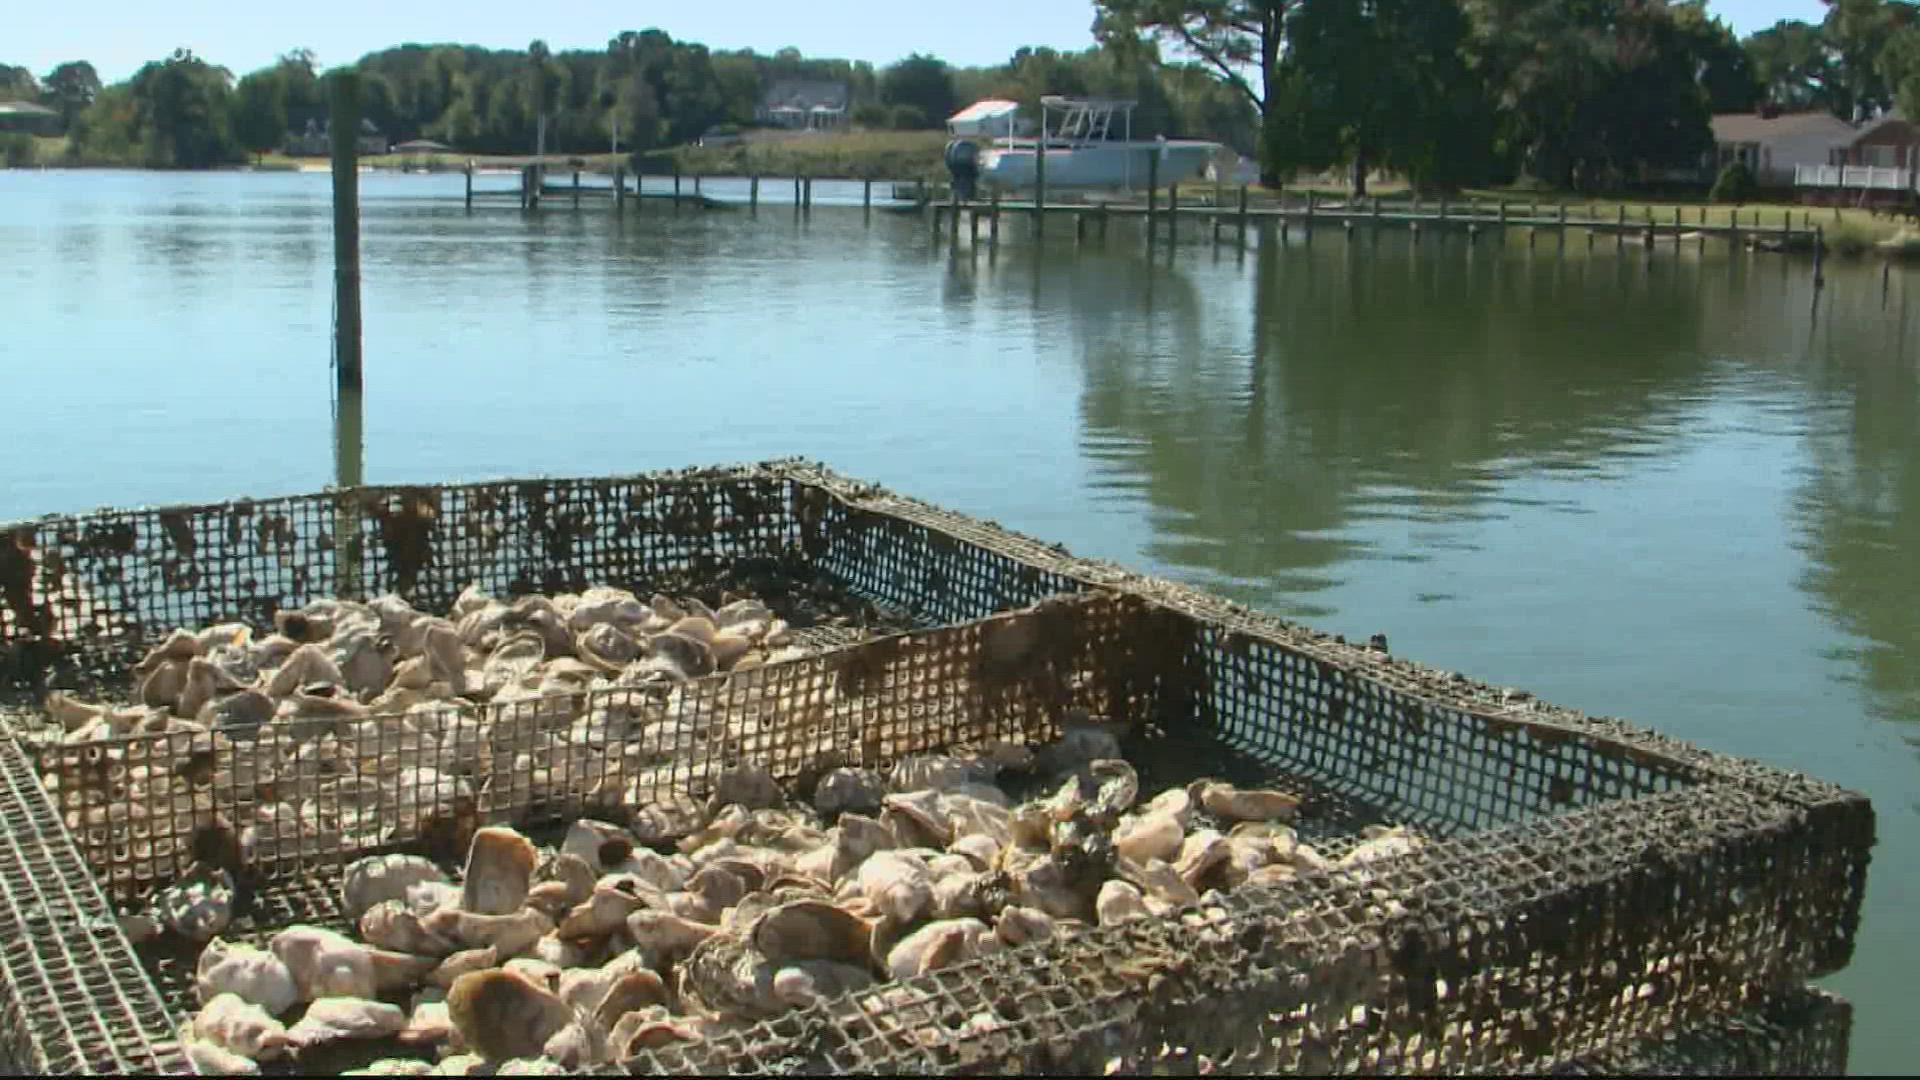 Oysters are good for your health, the economy and essential to aquatic life. Cousins Ryan and Travis Croxton have run Rappahannock Oyster Co. for the last 20 years.